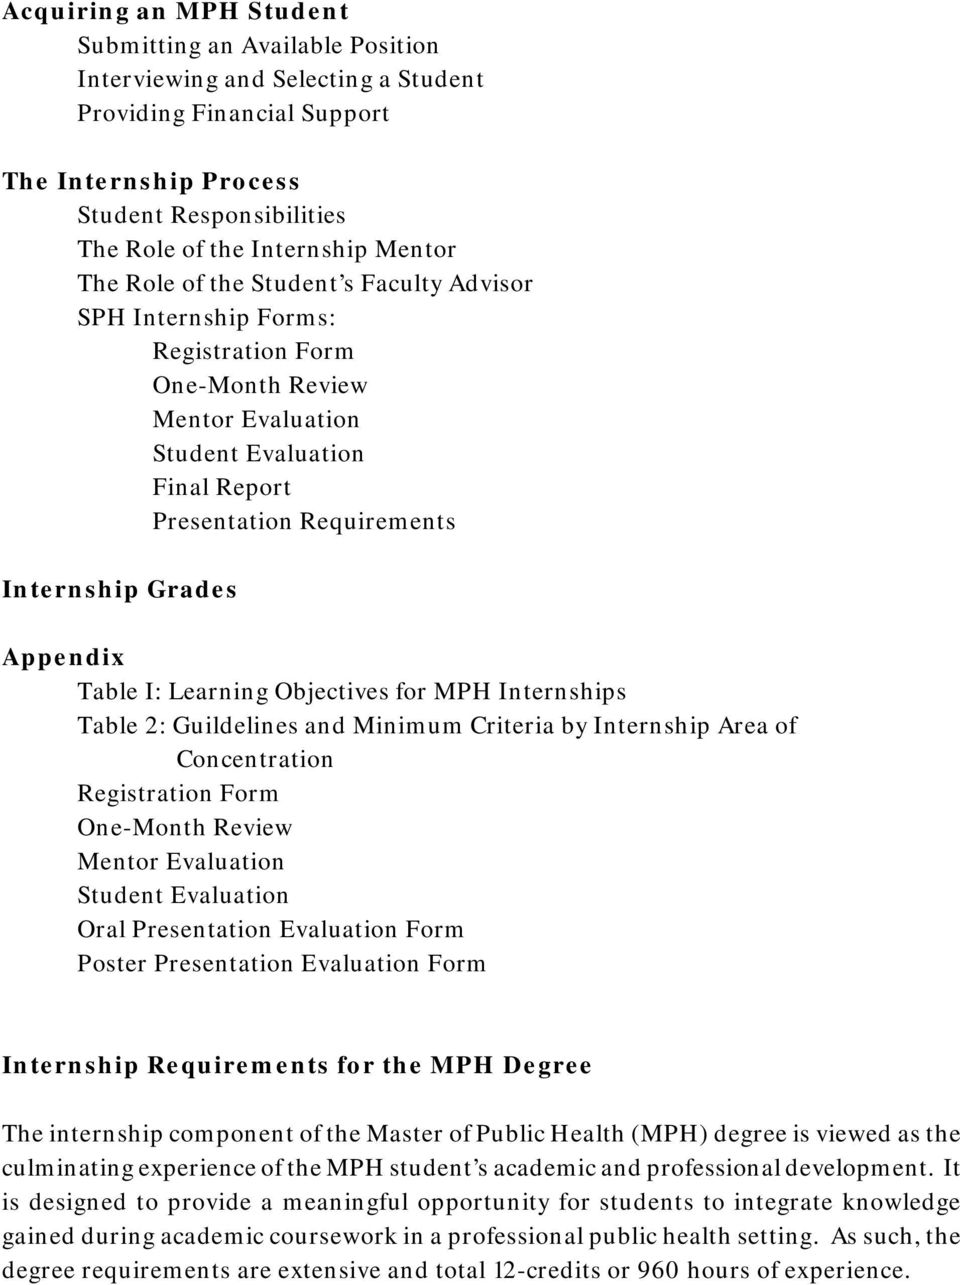 Appendix Table I: Learning Objectives for MPH Internships Table 2: Guildelines and Minimum Criteria by Internship Area of Concentration Registration Form One-Month Review Mentor Evaluation Student